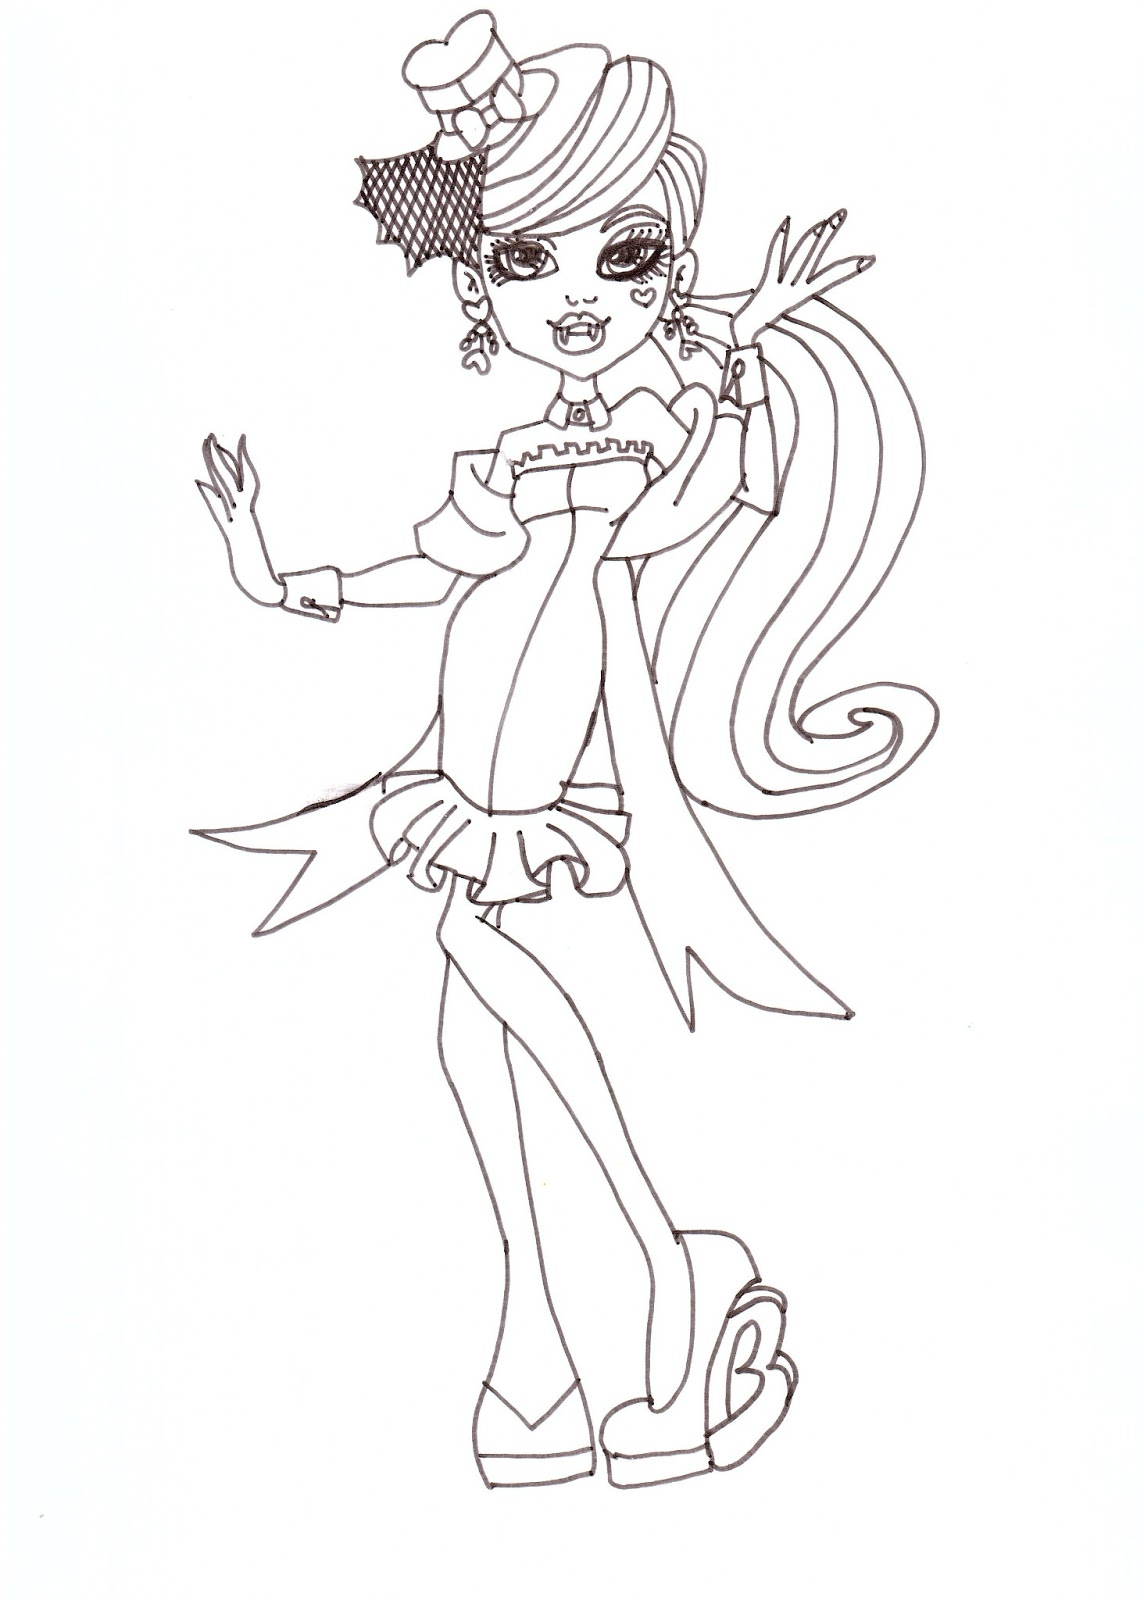 Free printable monster high coloring pages draculaura dawn of the dance coloring sheet